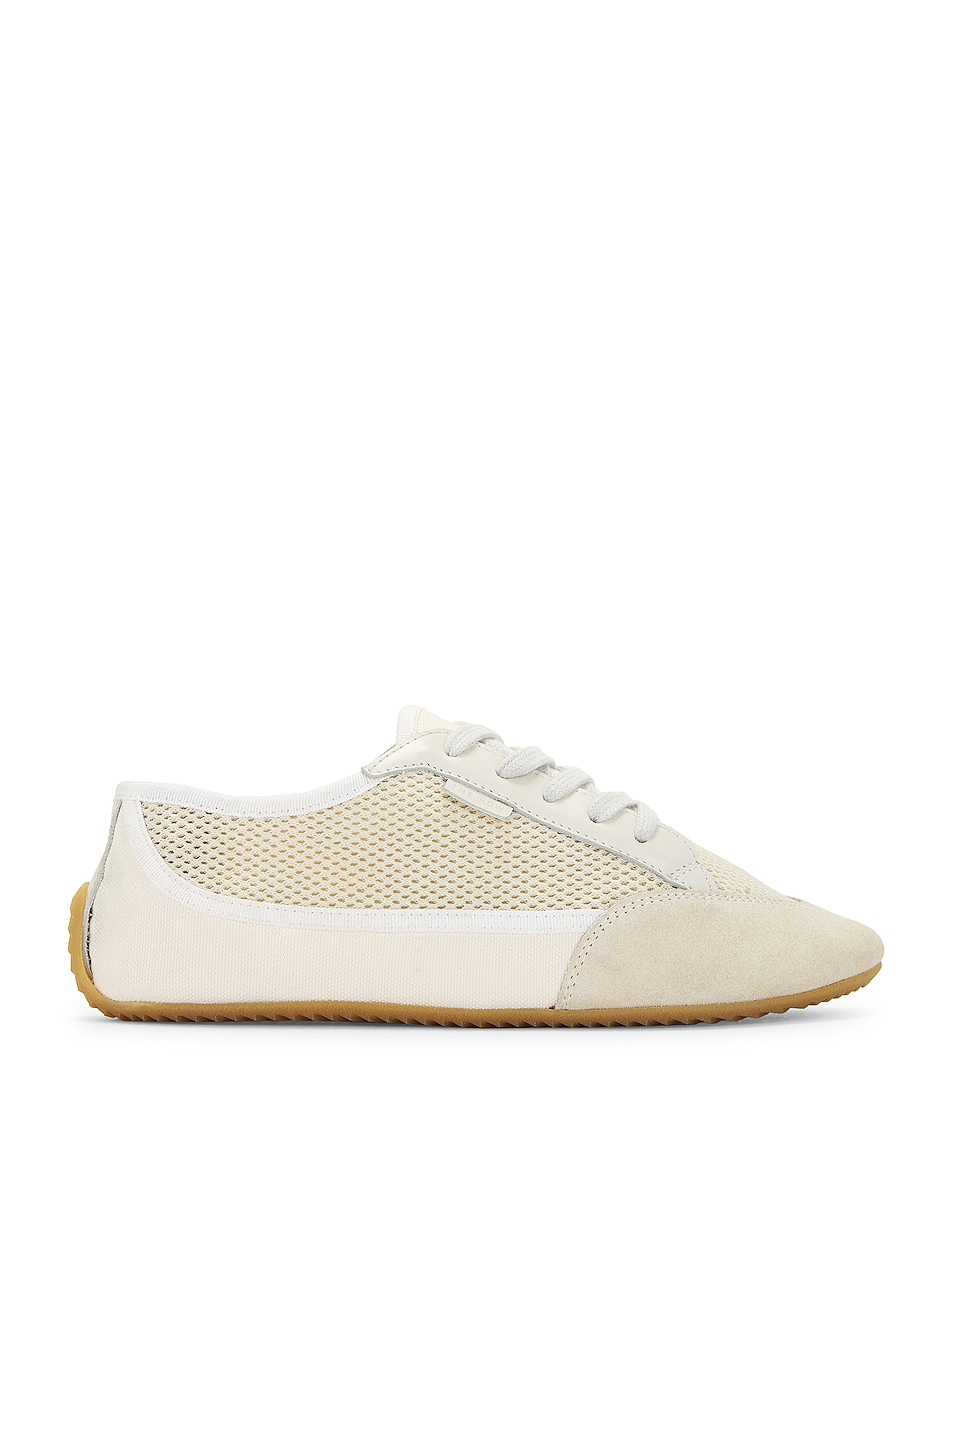 Image 1 of The Row Bonnie Sneaker in Ivory & Ivory